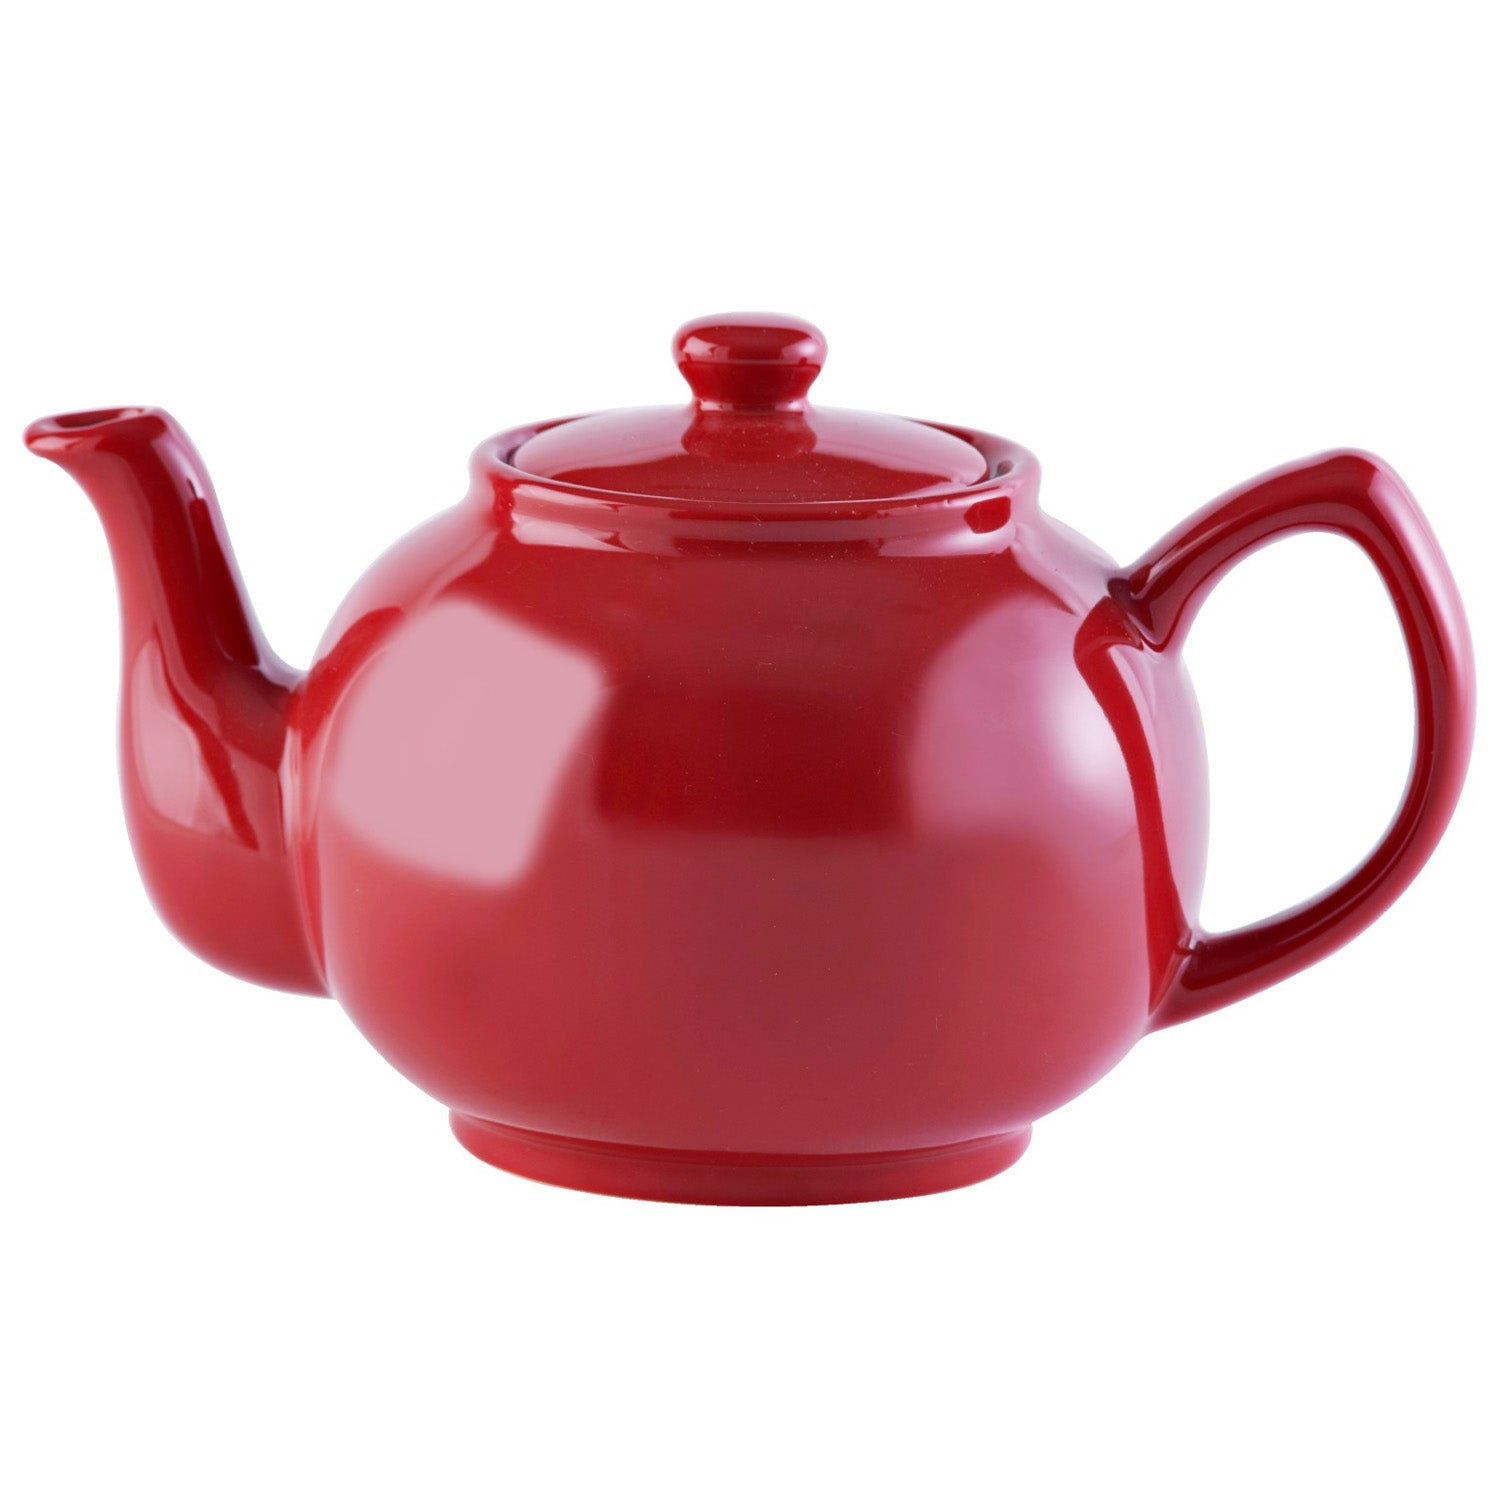 Large Brights Red Porcelain Tea Coffee 6 Cup Teapot Serving